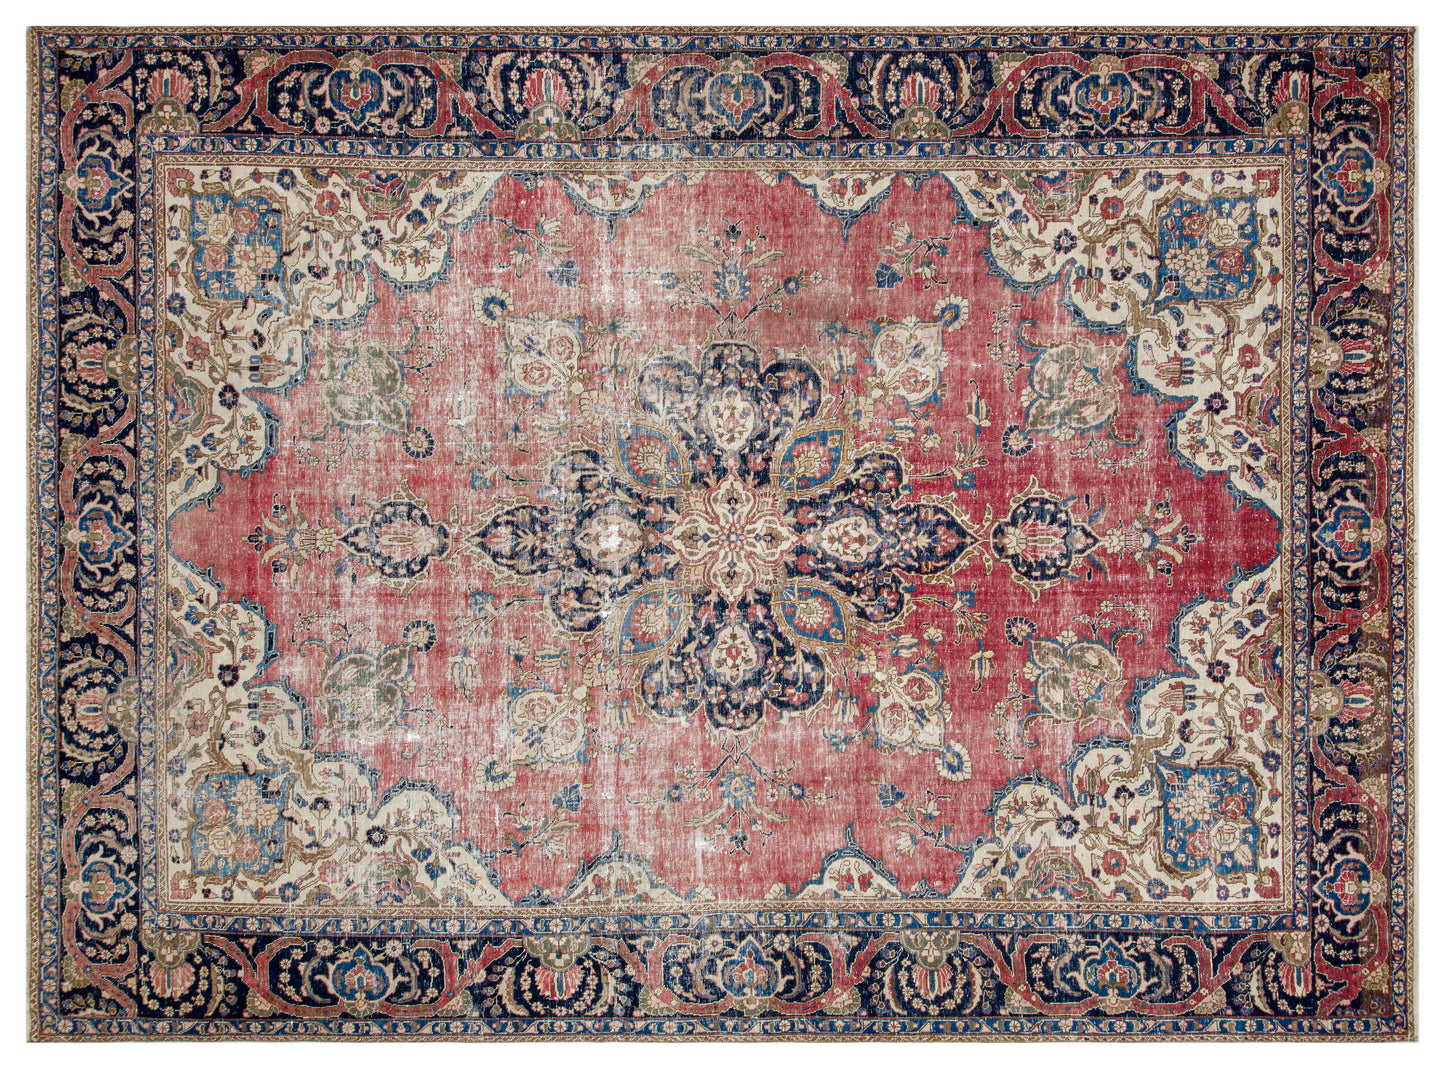 Vintage Rugs by Piginda: Timeless Beauty for Your Home,9'2" x 12'6"